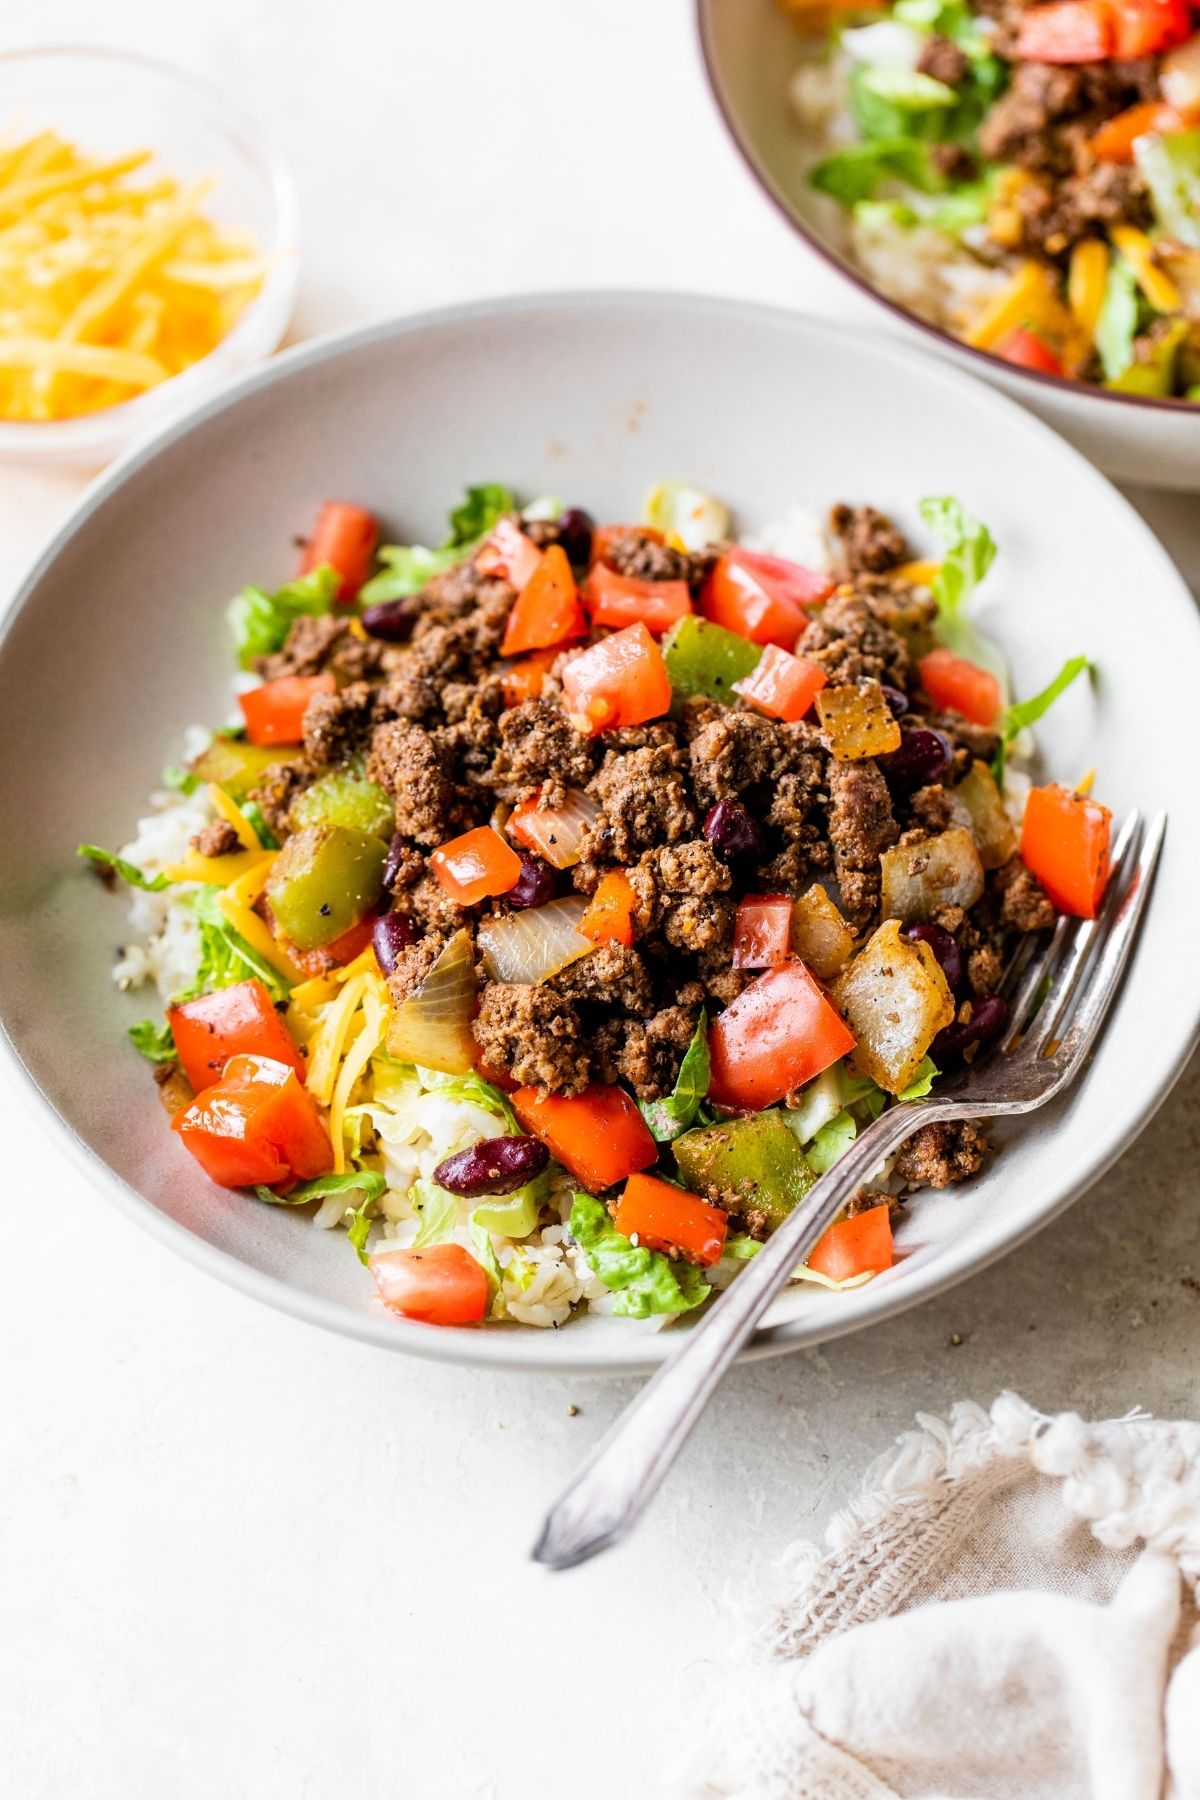 White bowl filled with lettuce, ground meat and tomatoes.